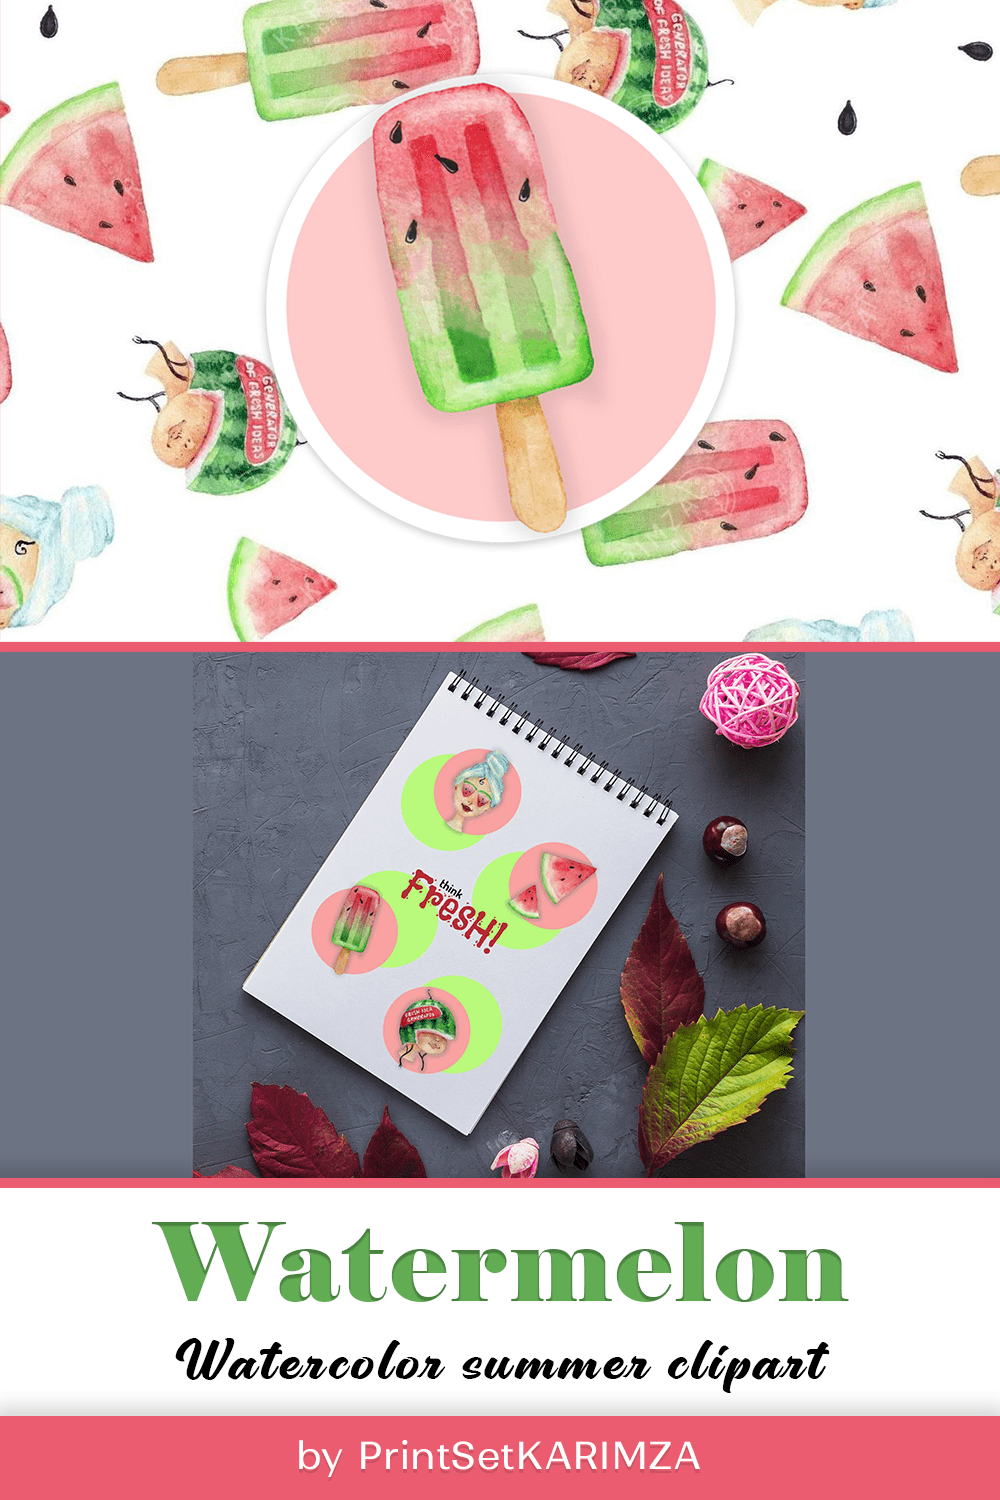 Watercolor summer clipart - pinterest image preview.